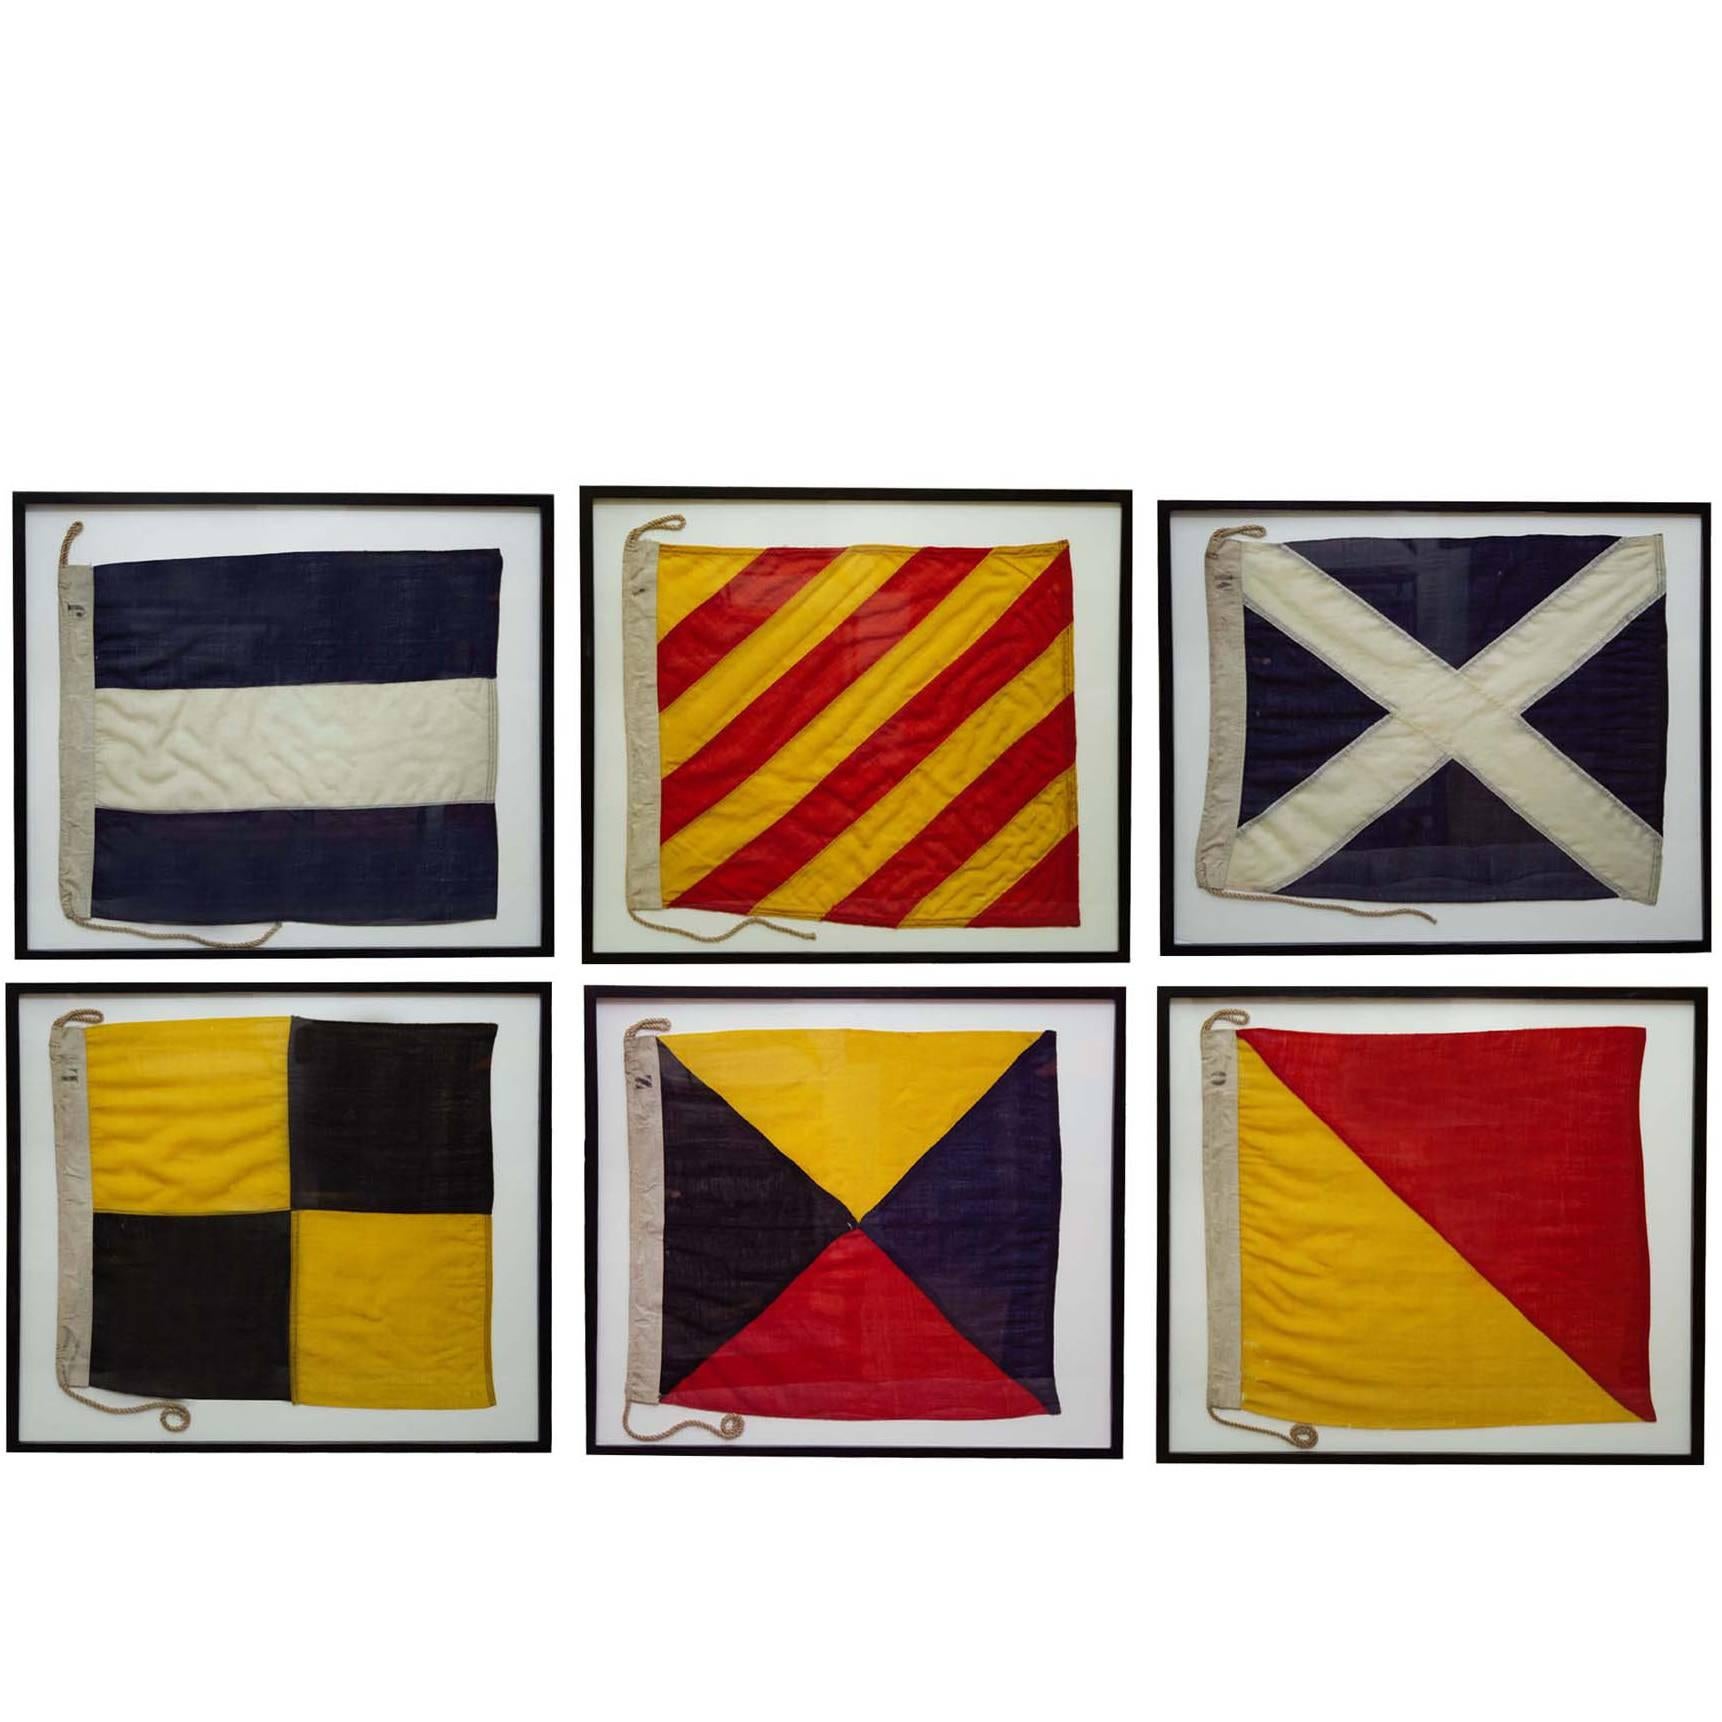 Authentic Antique WWII Nautical Signal Flags 